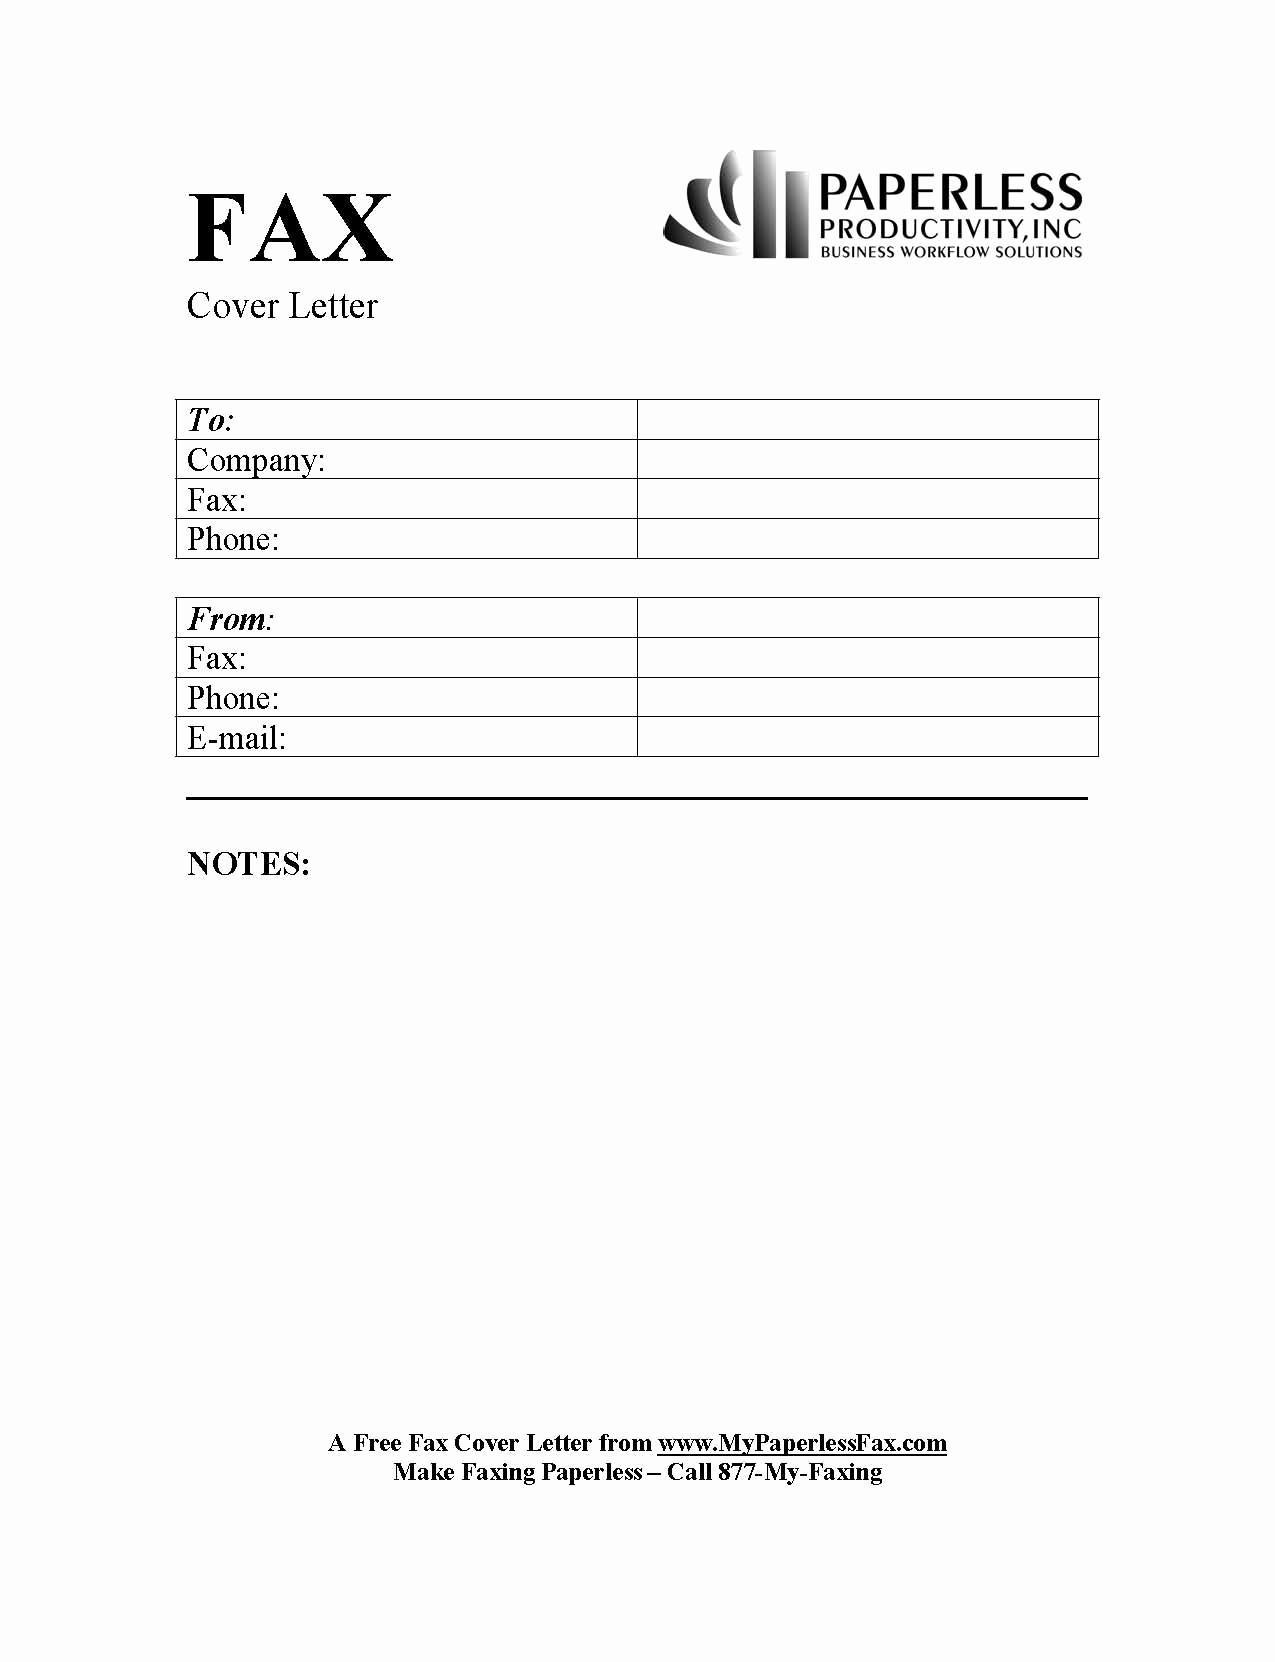 Free Fax Cover Sheet Templates New Microsoft Fice Fax Cover Sheet Template